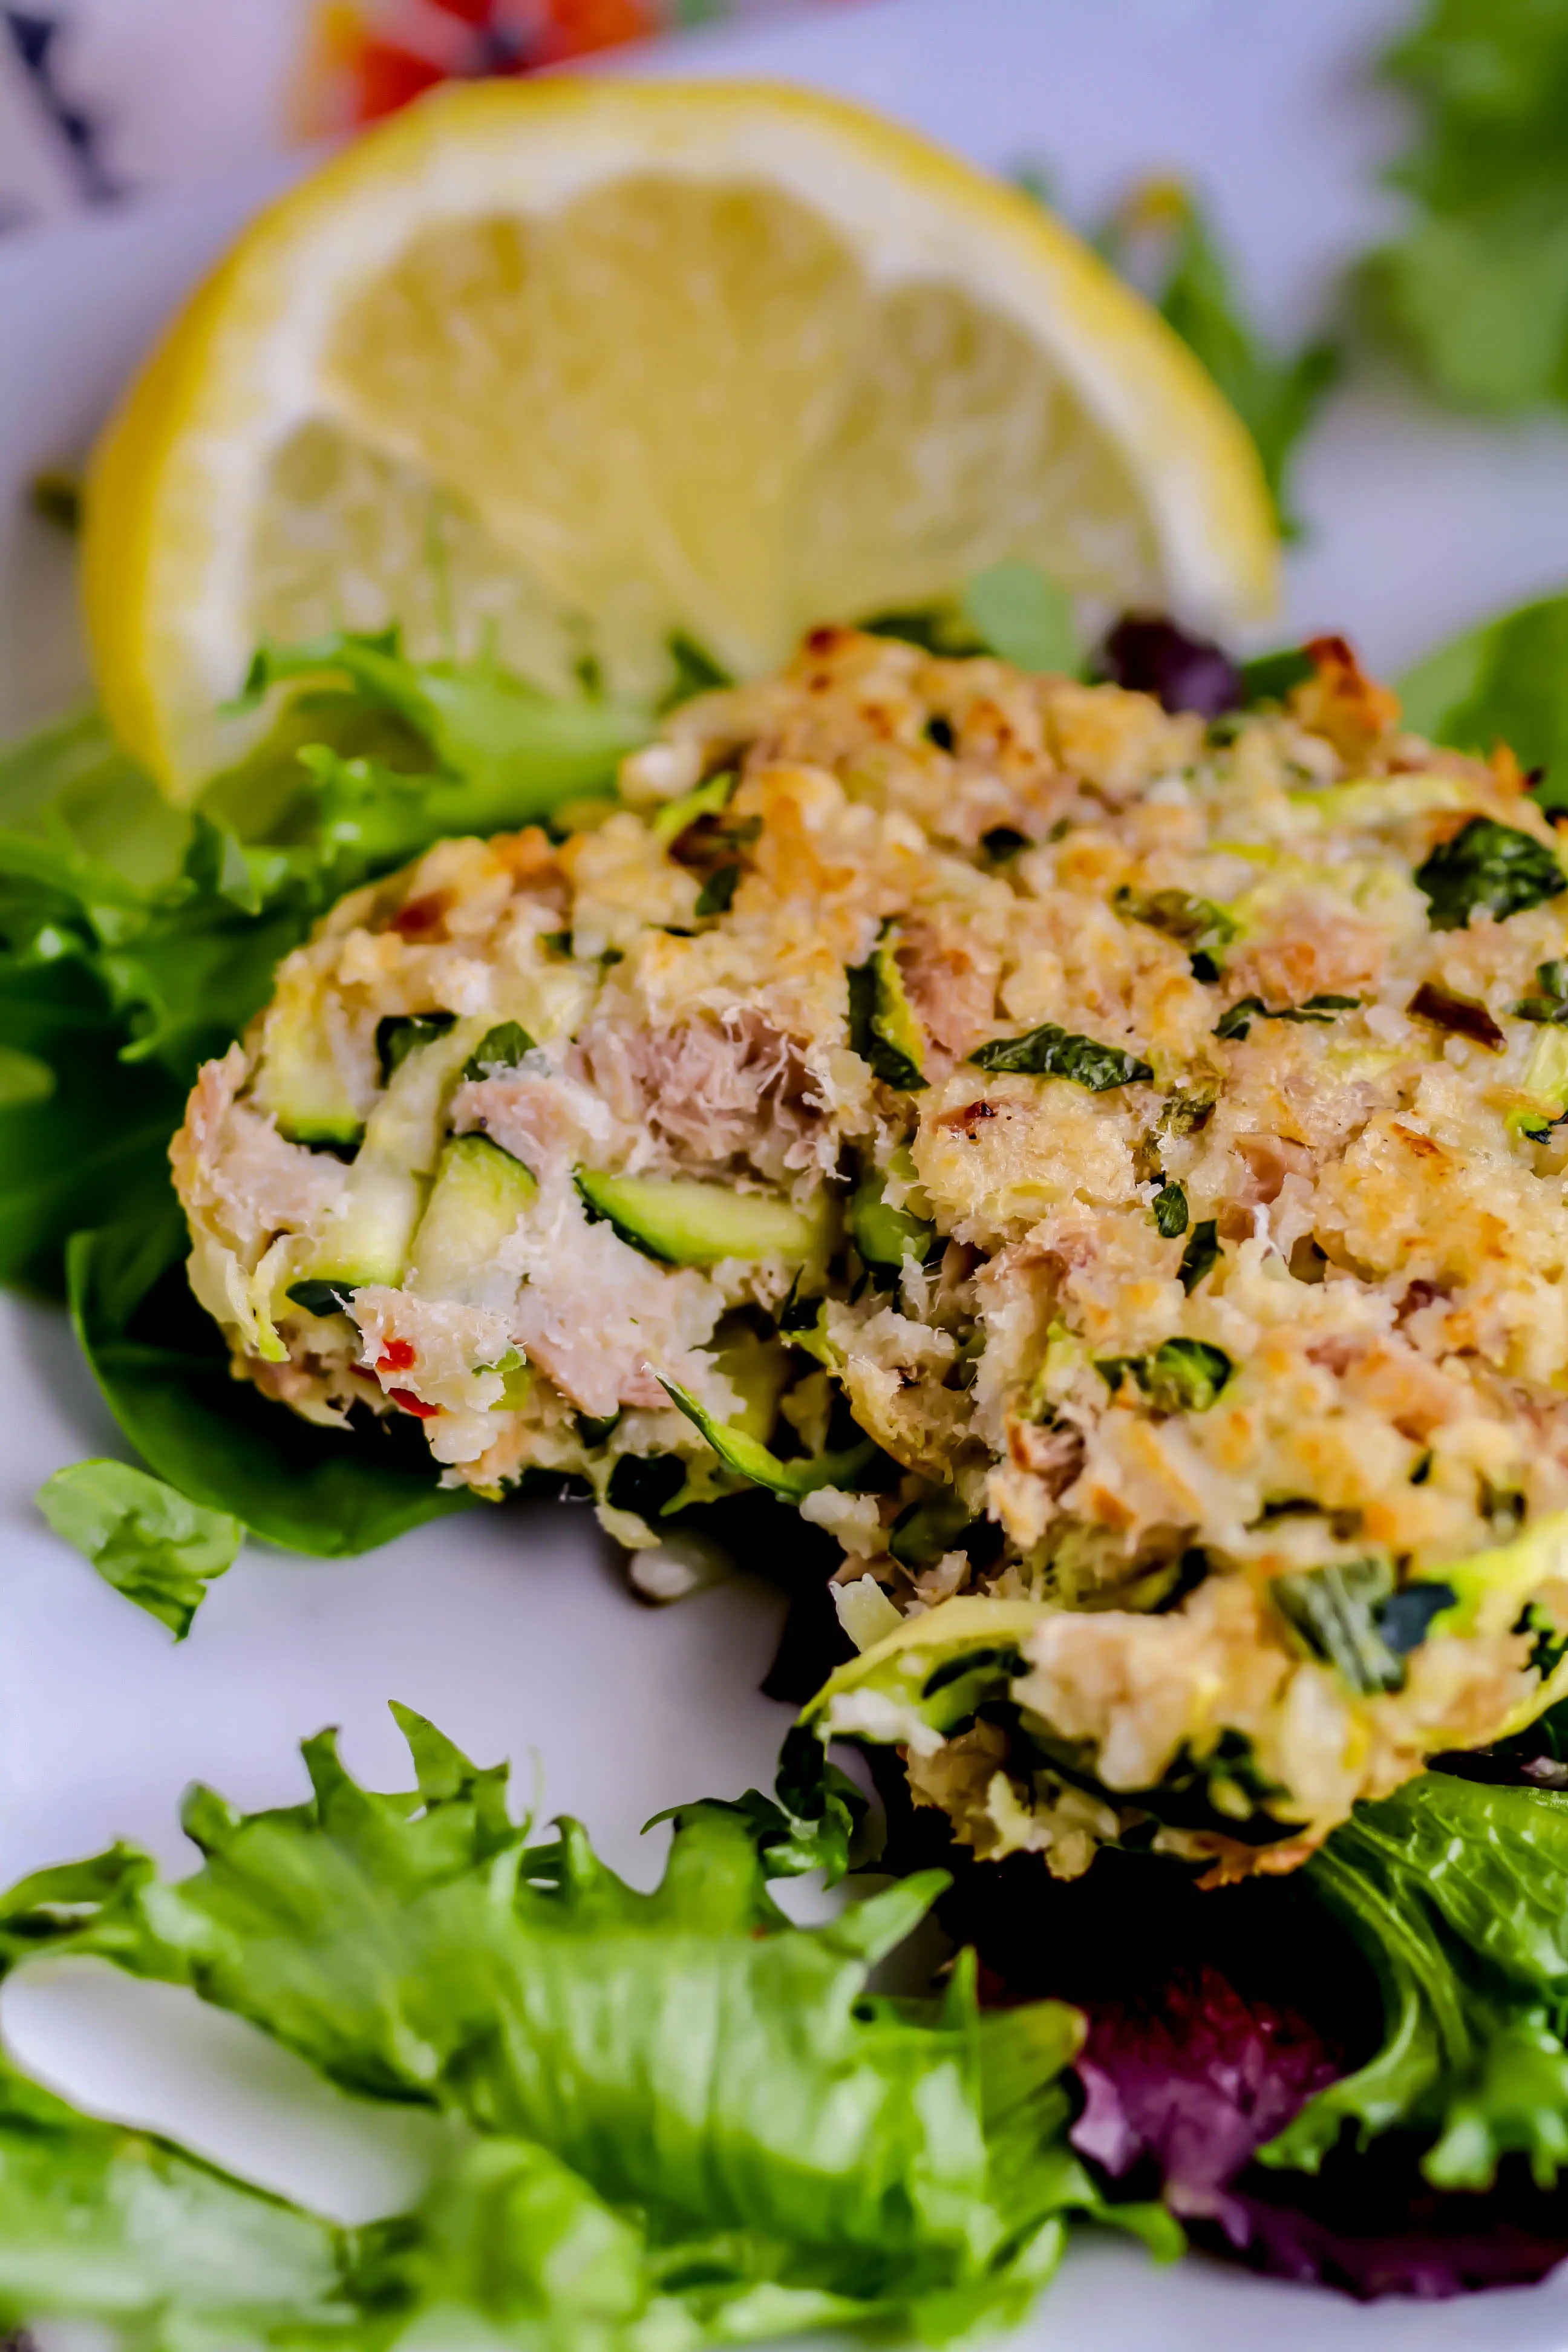 Baked Tuna and Zucchini Cakes with Lemon-Yogurt Dressing are healthy and fresh for a great treat! Baked Tuna and Zucchini Cakes with Lemon-Yogurt Dressing are baked, not fried, for a healthier snack or light meal.